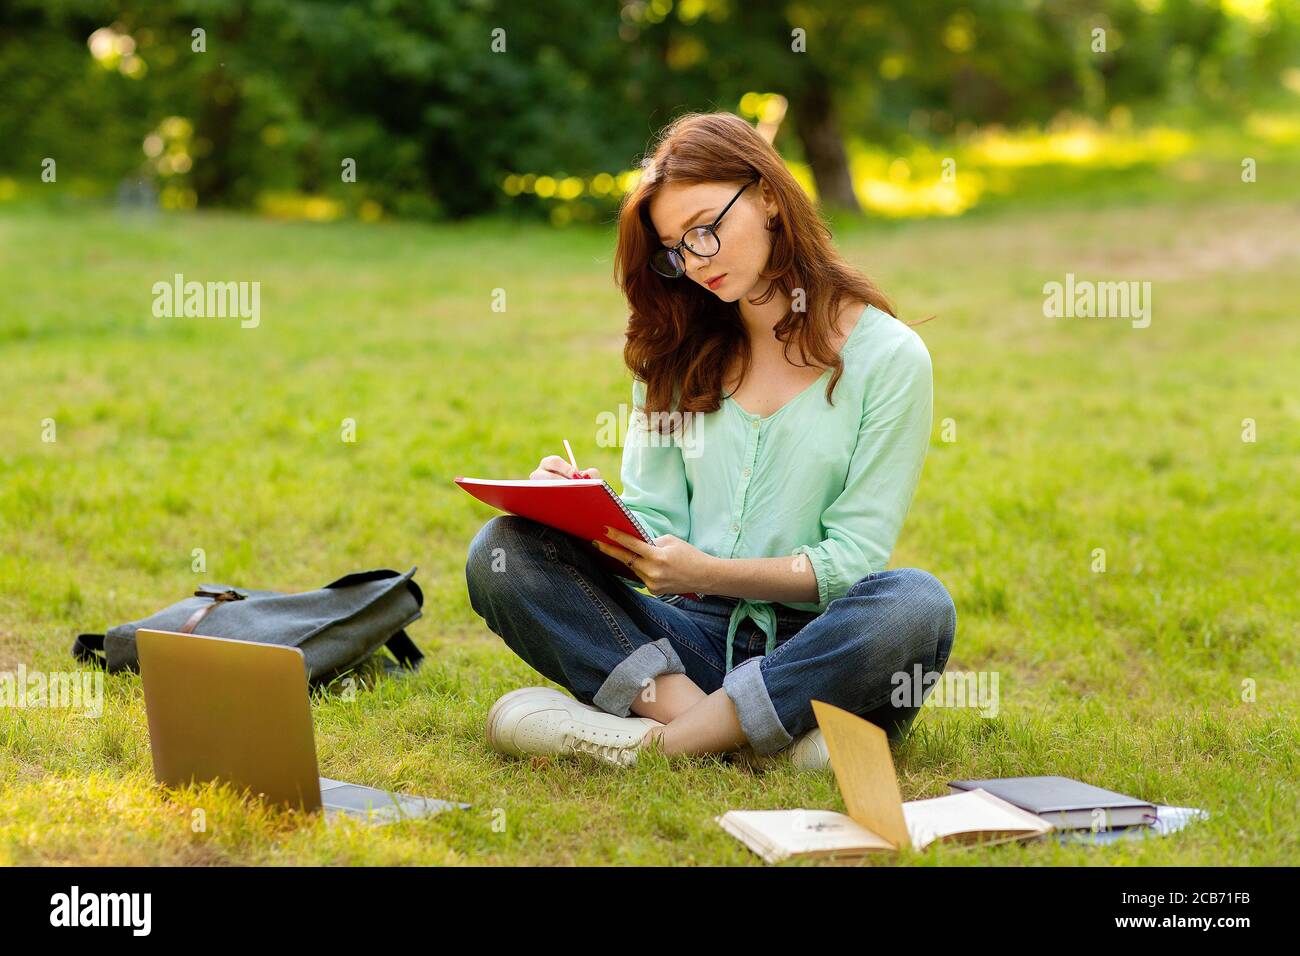 Beautiful redhead student girl preparing for exams in park, writing notes Stock Photo